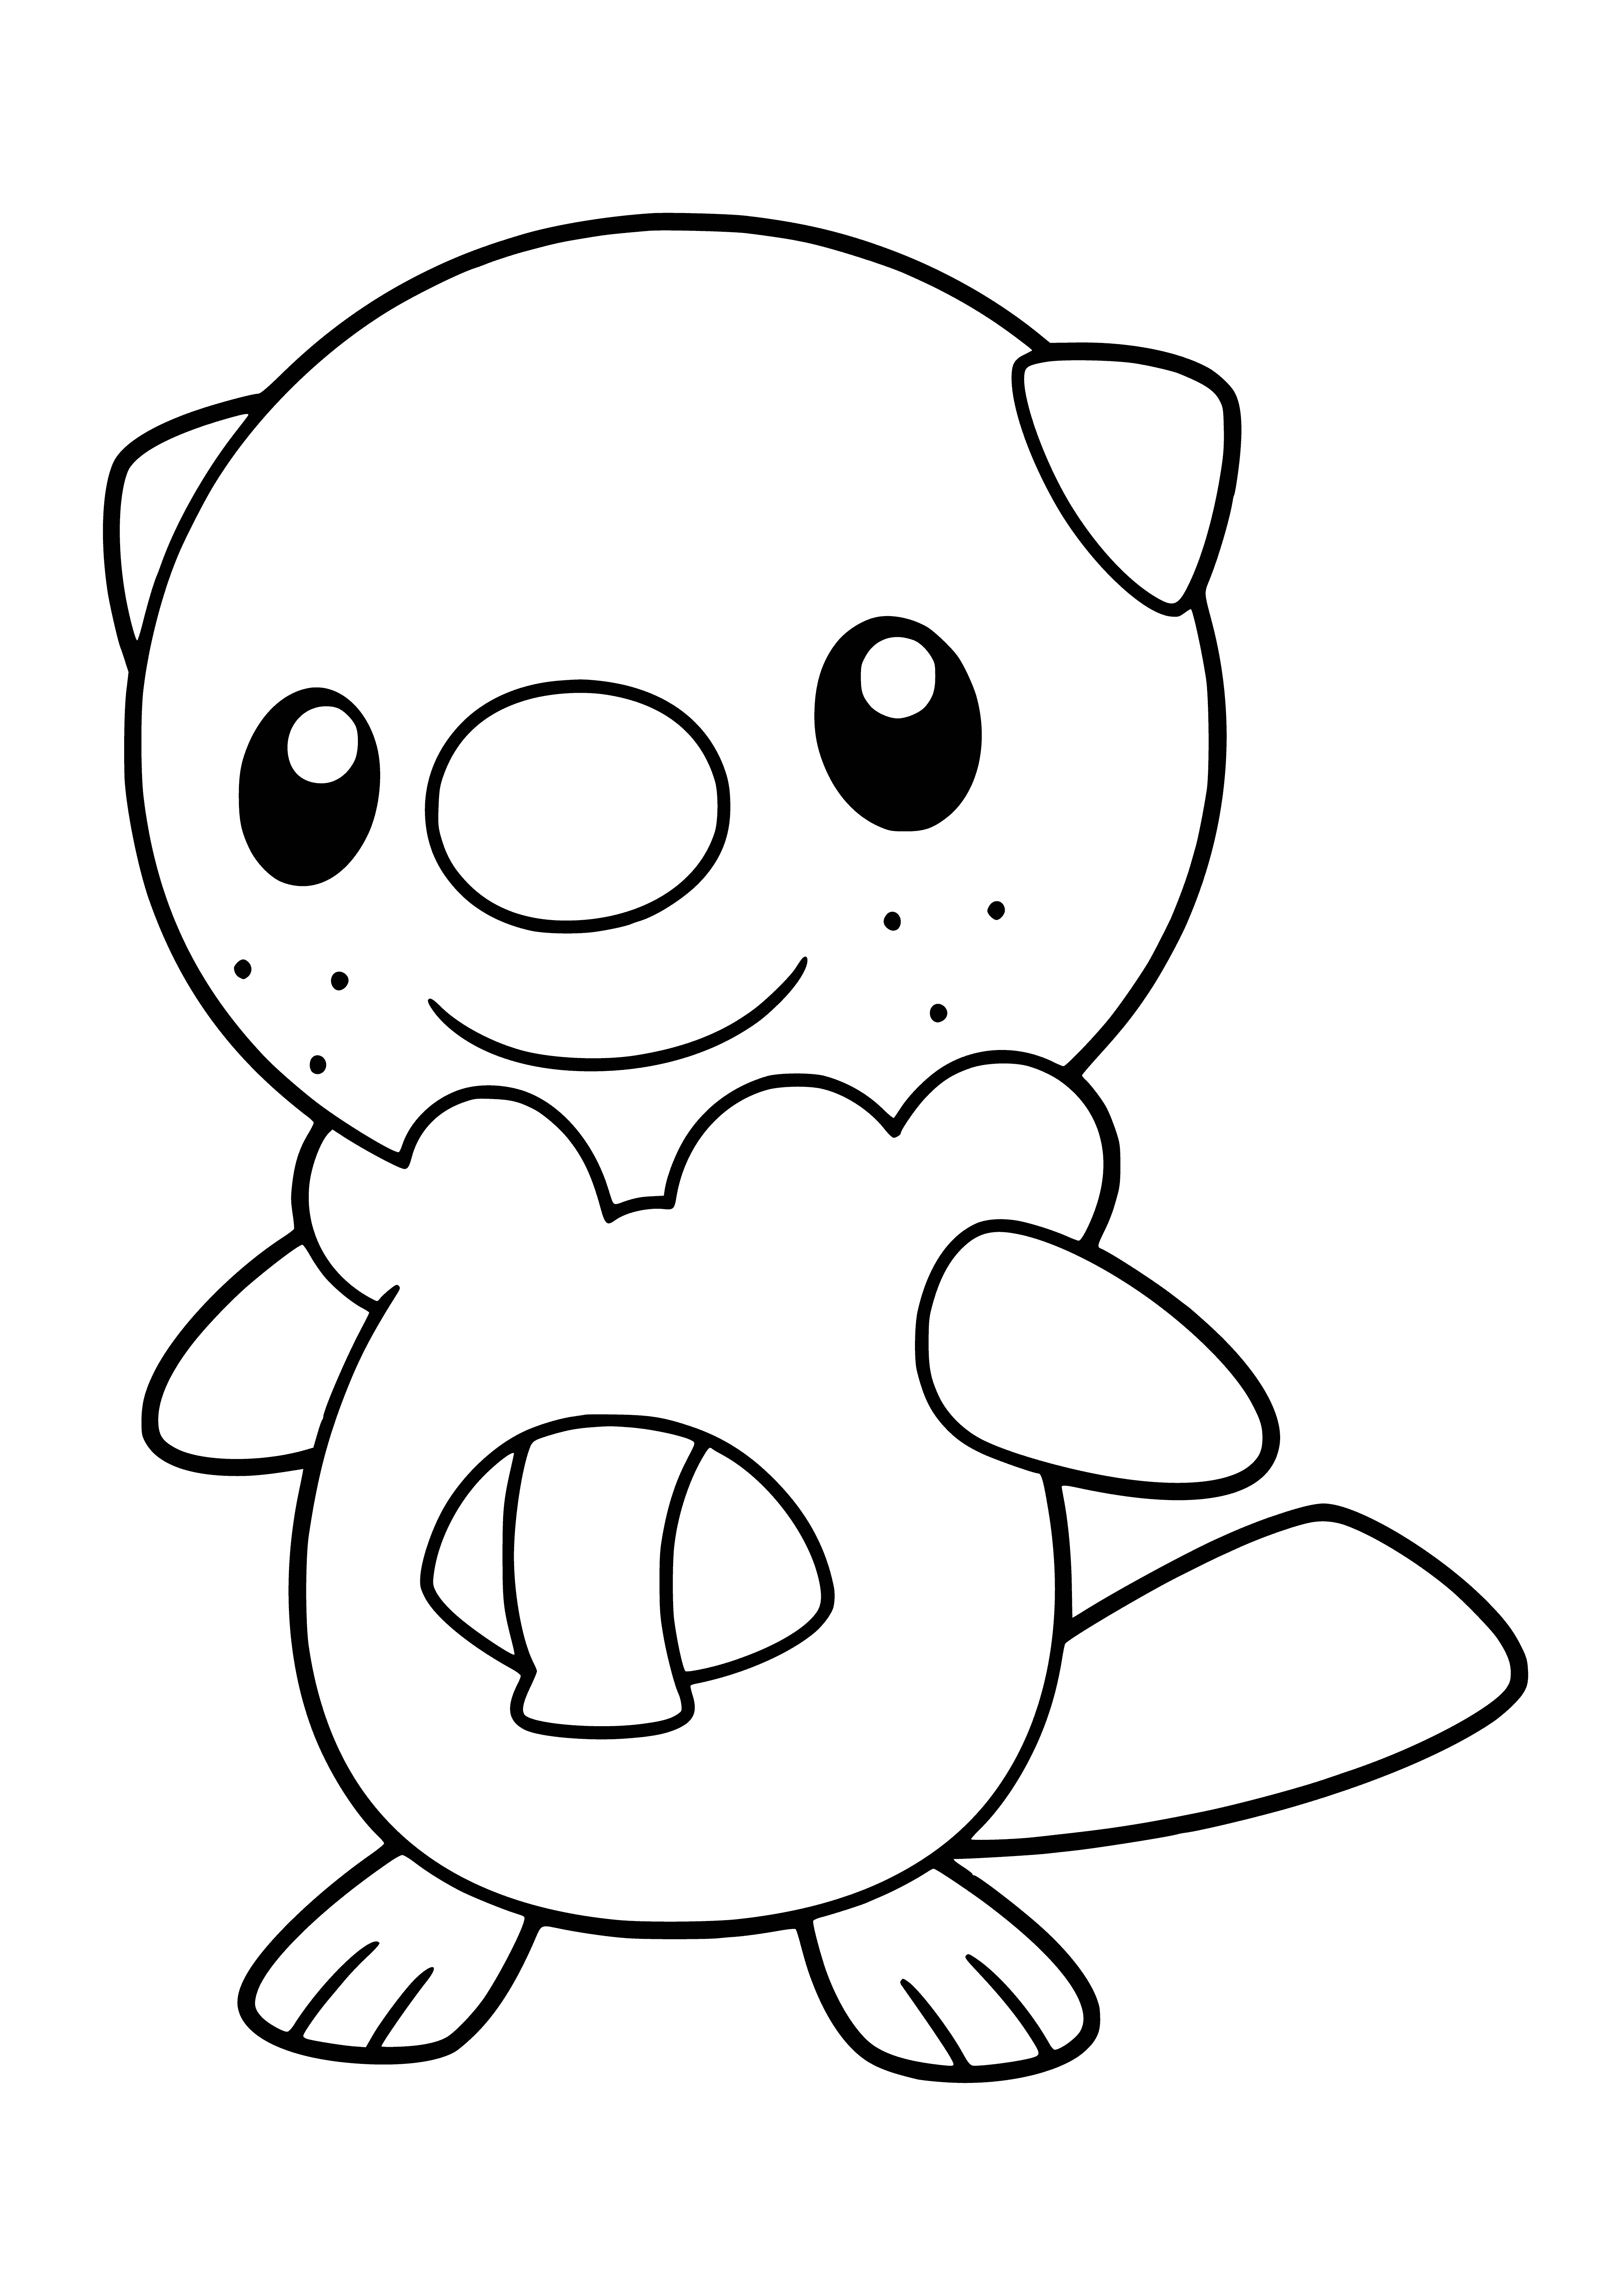 coloring page: Oshawott is a blue sea otter Pokémon with white belly, tufted tail, black nose, large eyes, and white forepaws with three claws. It has a green scallop-shaped shell on its back.